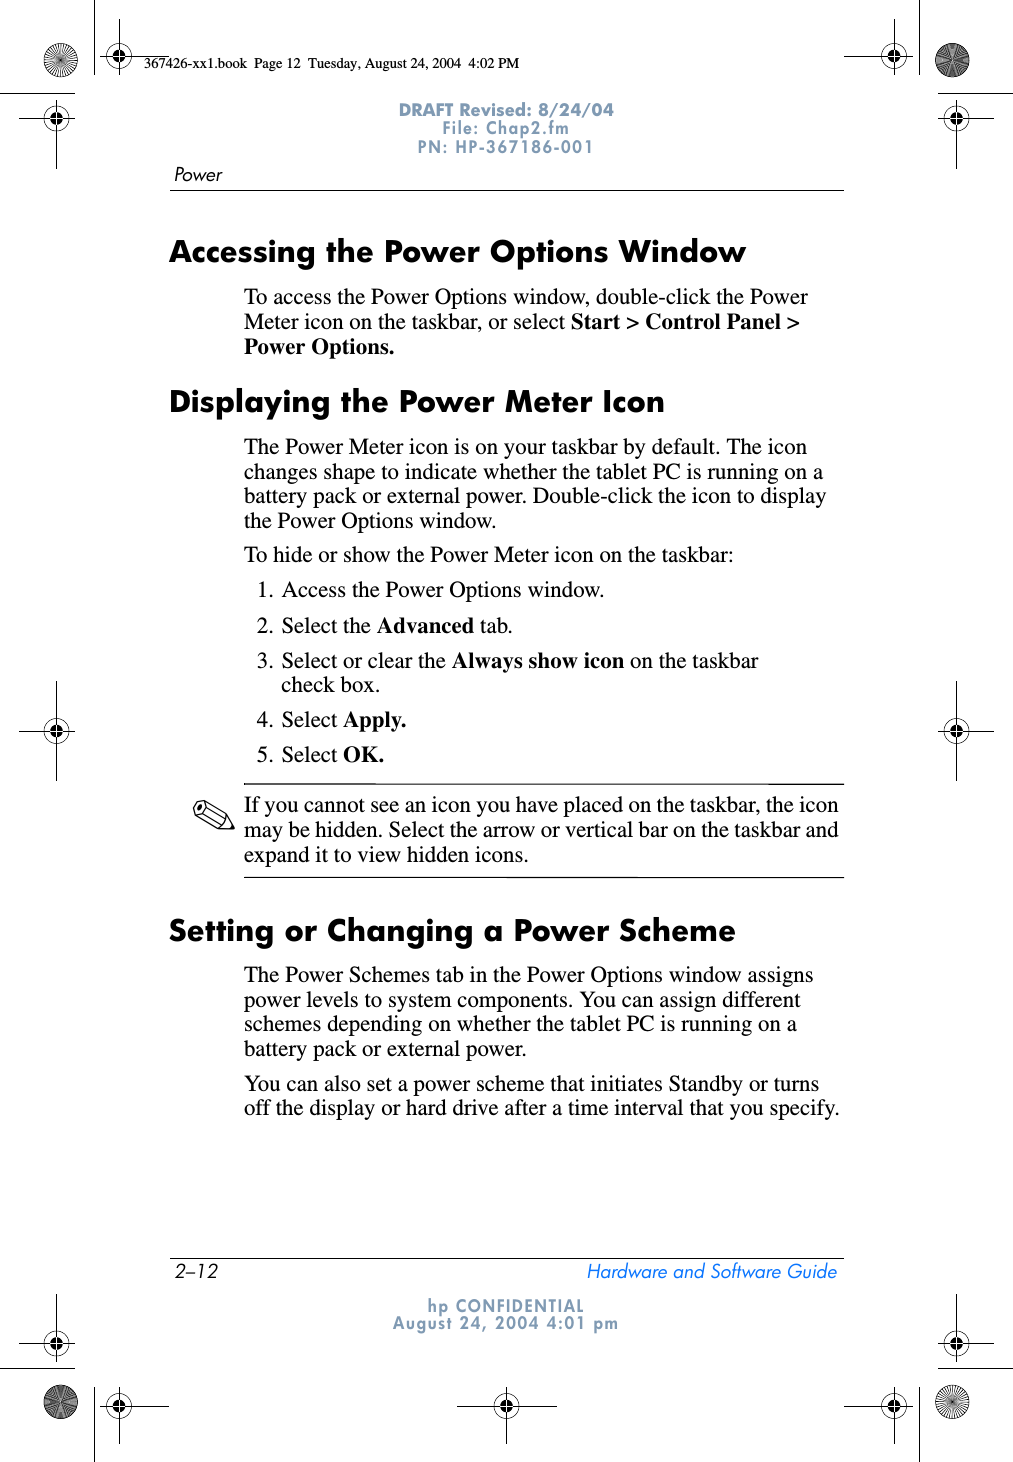 2–12 Hardware and Software GuidePowerDRAFT Revised: 8/24/04File: Chap2.fm PN: HP-367186-001 hp CONFIDENTIALAugust 24, 2004 4:01 pmAccessing the Power Options WindowTo access the Power Options window, double-click the Power Meter icon on the taskbar, or select Start &gt; Control Panel &gt; Power Options.Displaying the Power Meter IconThe Power Meter icon is on your taskbar by default. The icon changes shape to indicate whether the tablet PC is running on a battery pack or external power. Double-click the icon to display the Power Options window.To hide or show the Power Meter icon on the taskbar:1. Access the Power Options window.2. Select the Advanced tab.3. Select or clear the Always show icon on the taskbar check box.4. Select Apply.5. Select OK.✎If you cannot see an icon you have placed on the taskbar, the icon may be hidden. Select the arrow or vertical bar on the taskbar and expand it to view hidden icons.Setting or Changing a Power SchemeThe Power Schemes tab in the Power Options window assigns power levels to system components. You can assign different schemes depending on whether the tablet PC is running on a battery pack or external power.You can also set a power scheme that initiates Standby or turns off the display or hard drive after a time interval that you specify.367426-xx1.book  Page 12  Tuesday, August 24, 2004  4:02 PM